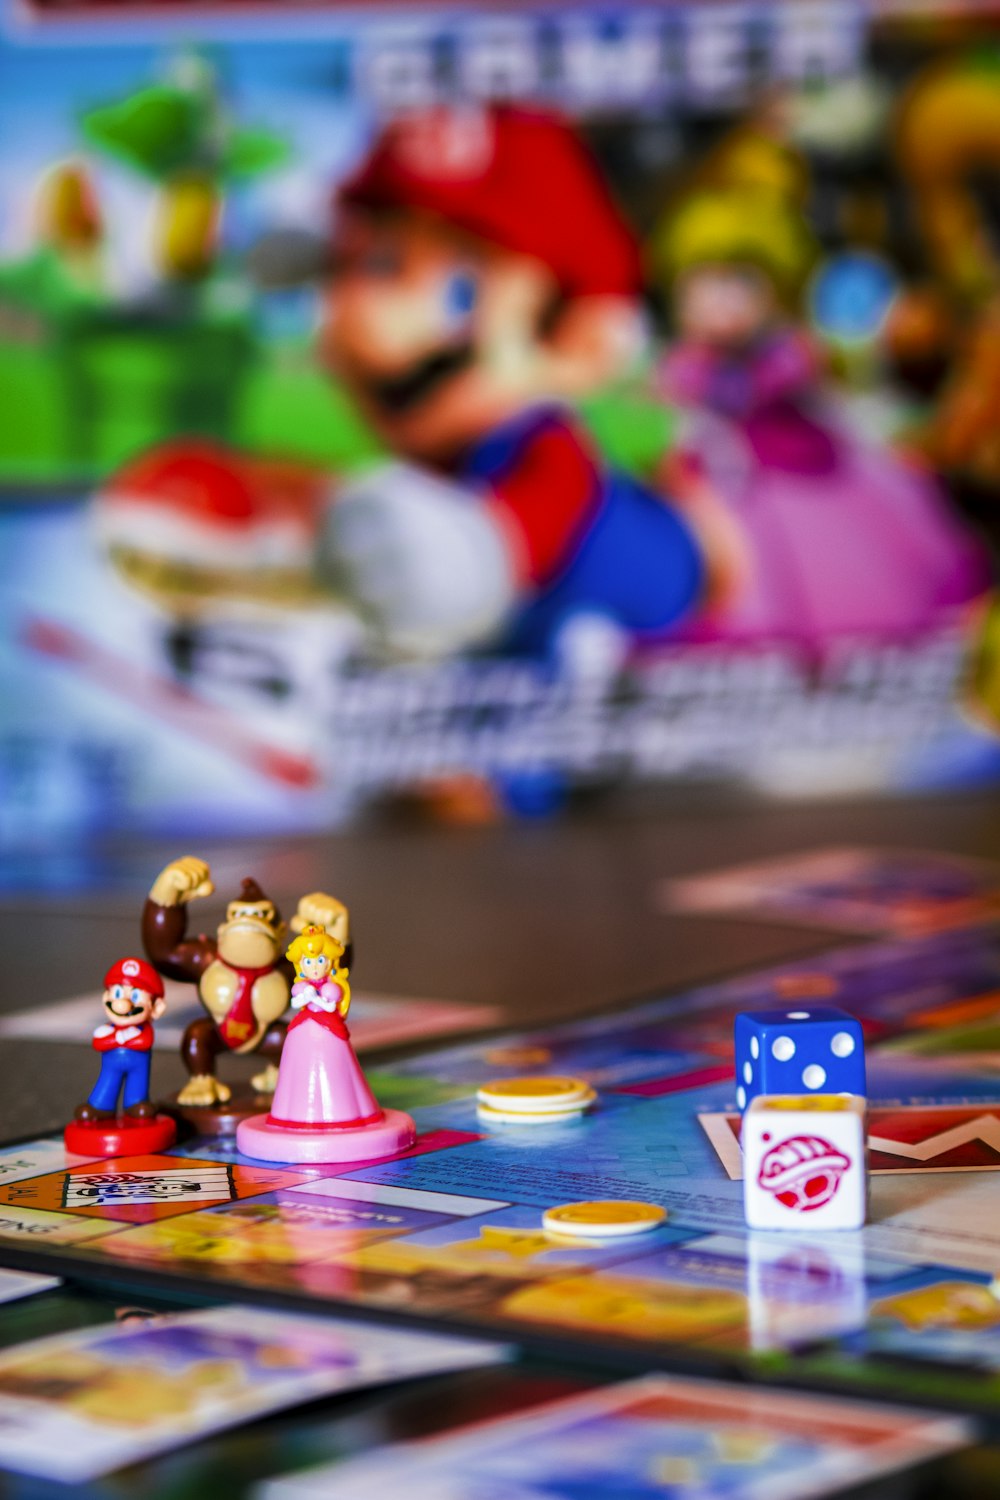 a close up of a nintendo game on a table